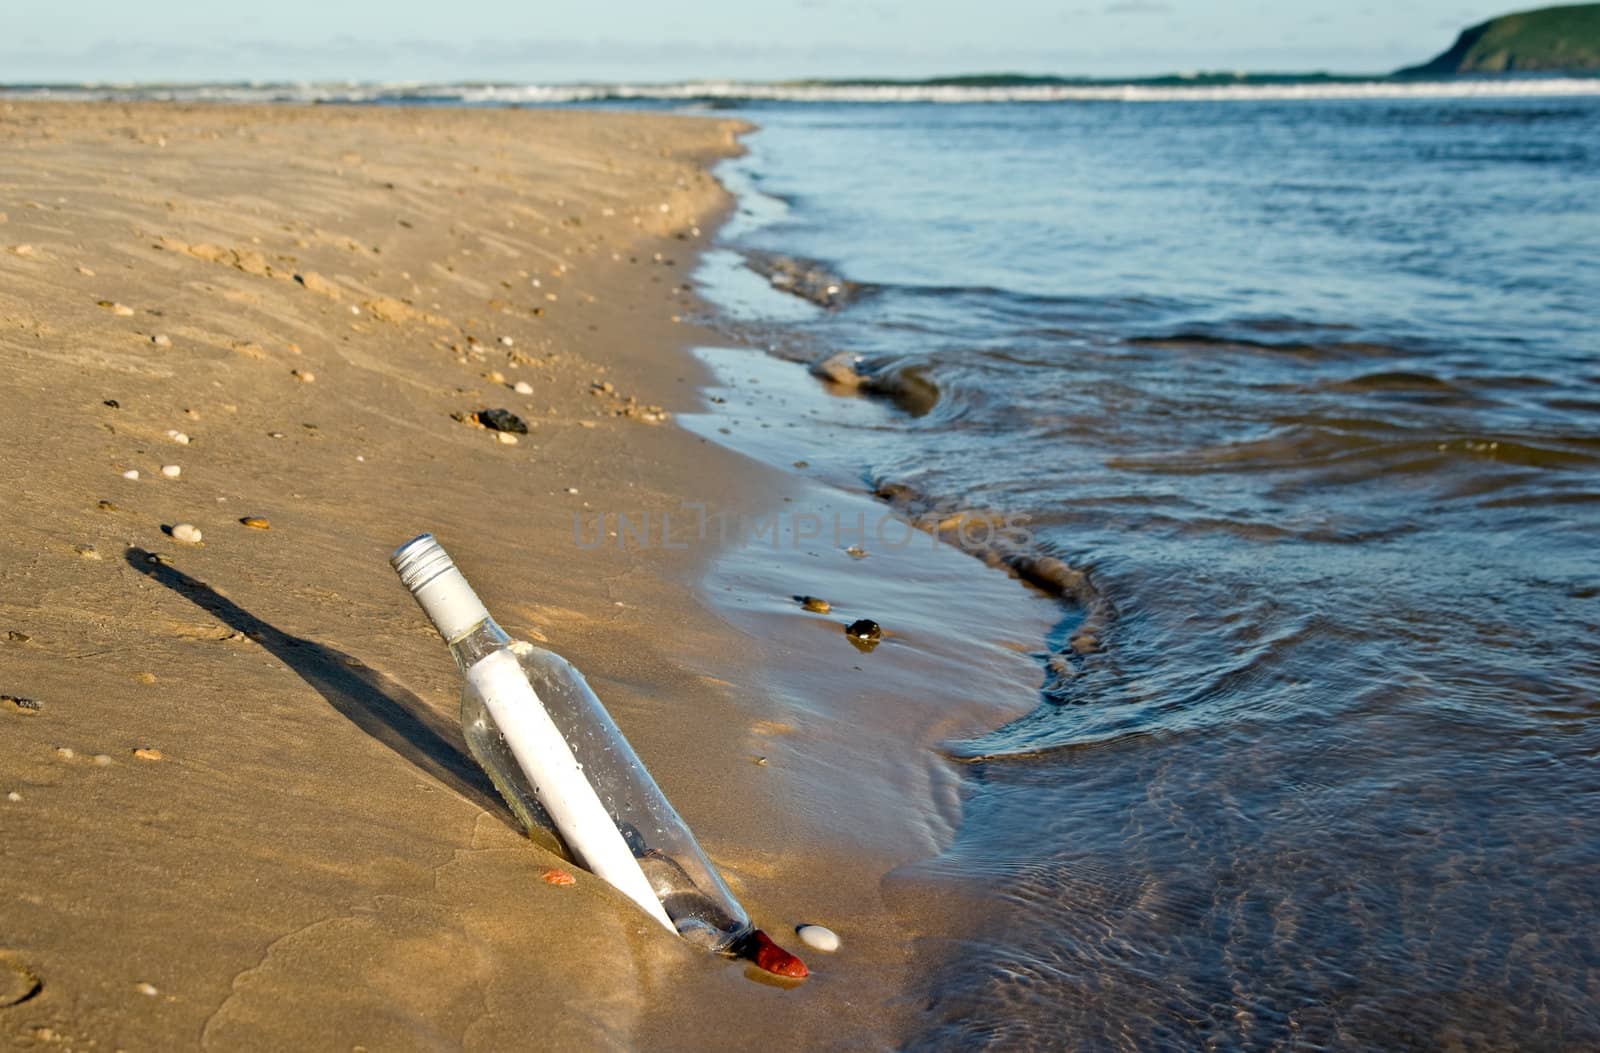 great image of a message in a bottle at the waters edge